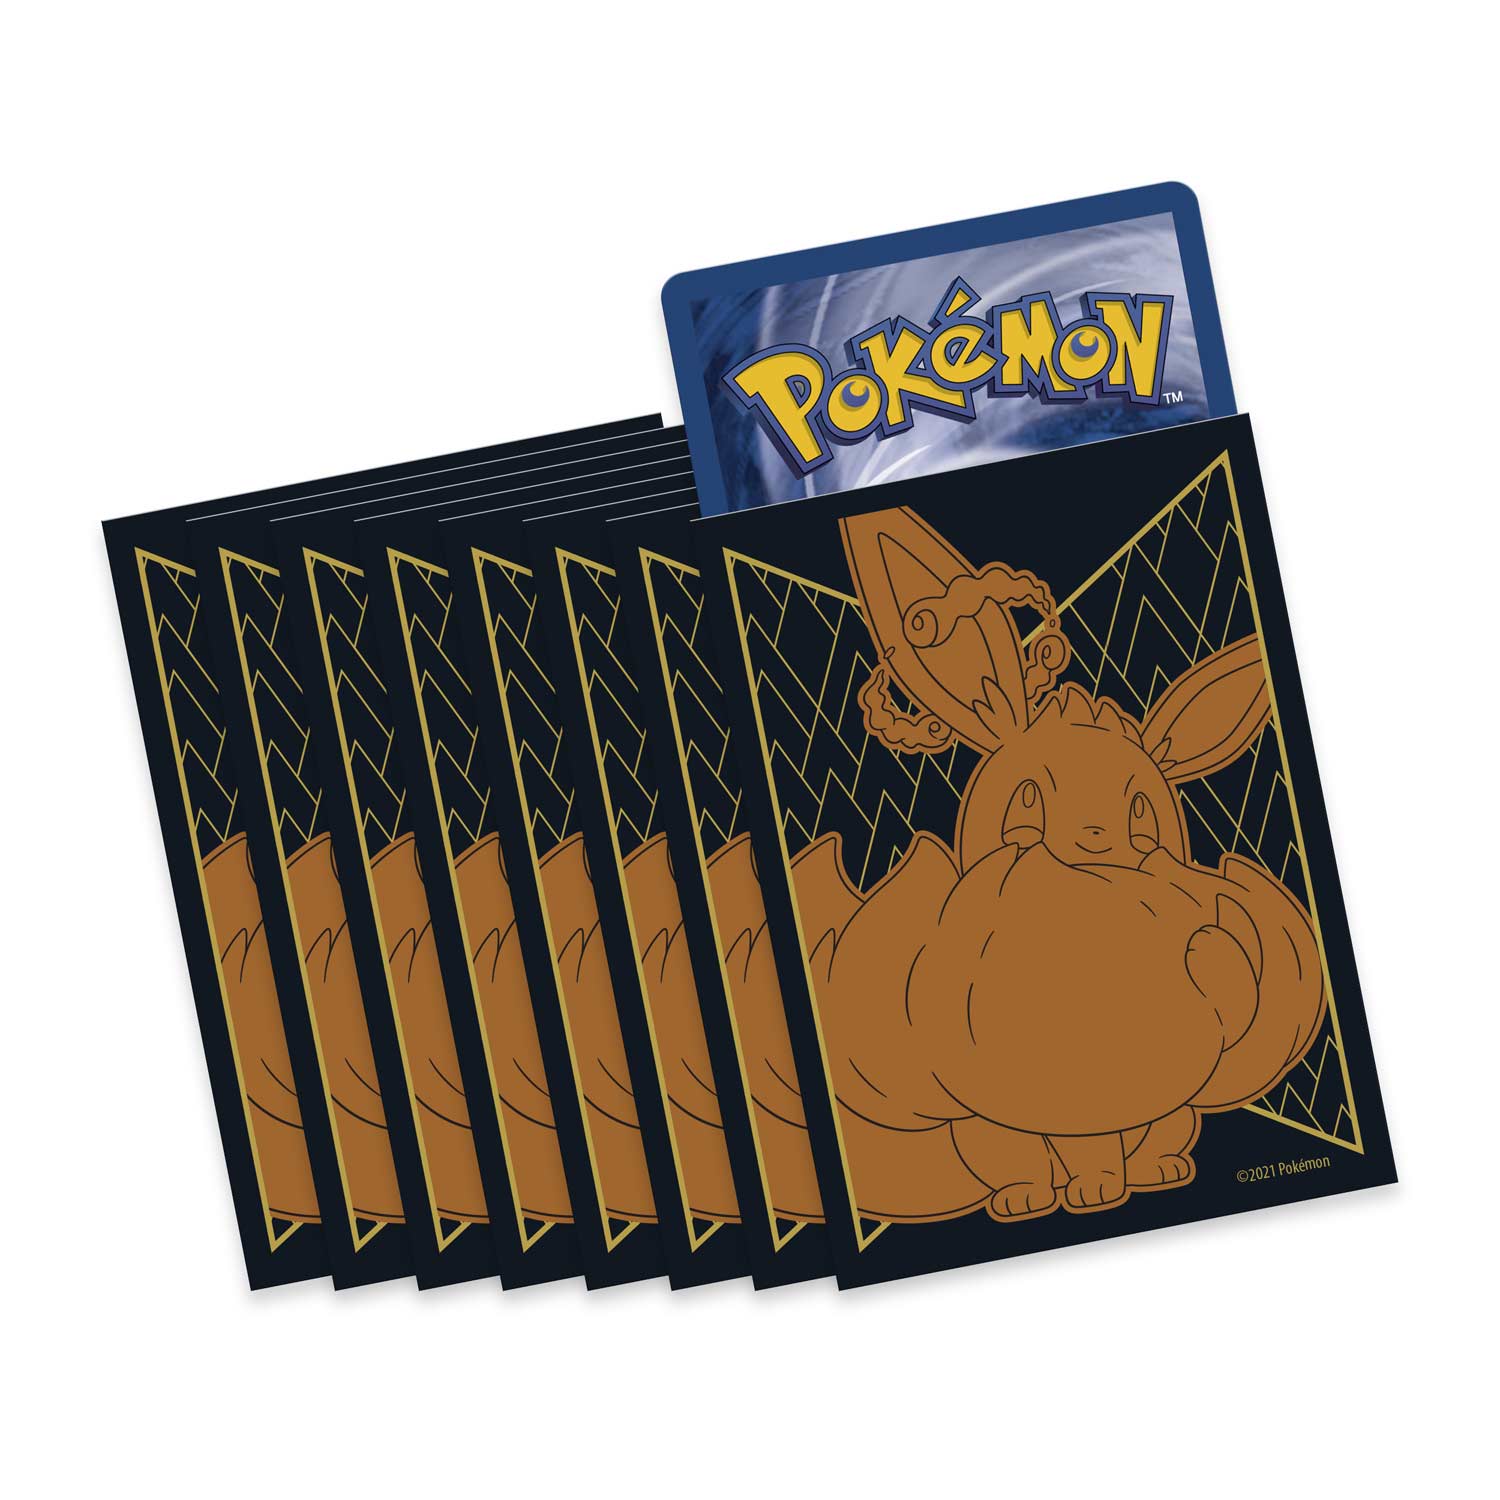 This shows an image of the Eevee-themed deck protection sleeves included in the elite trainer box.